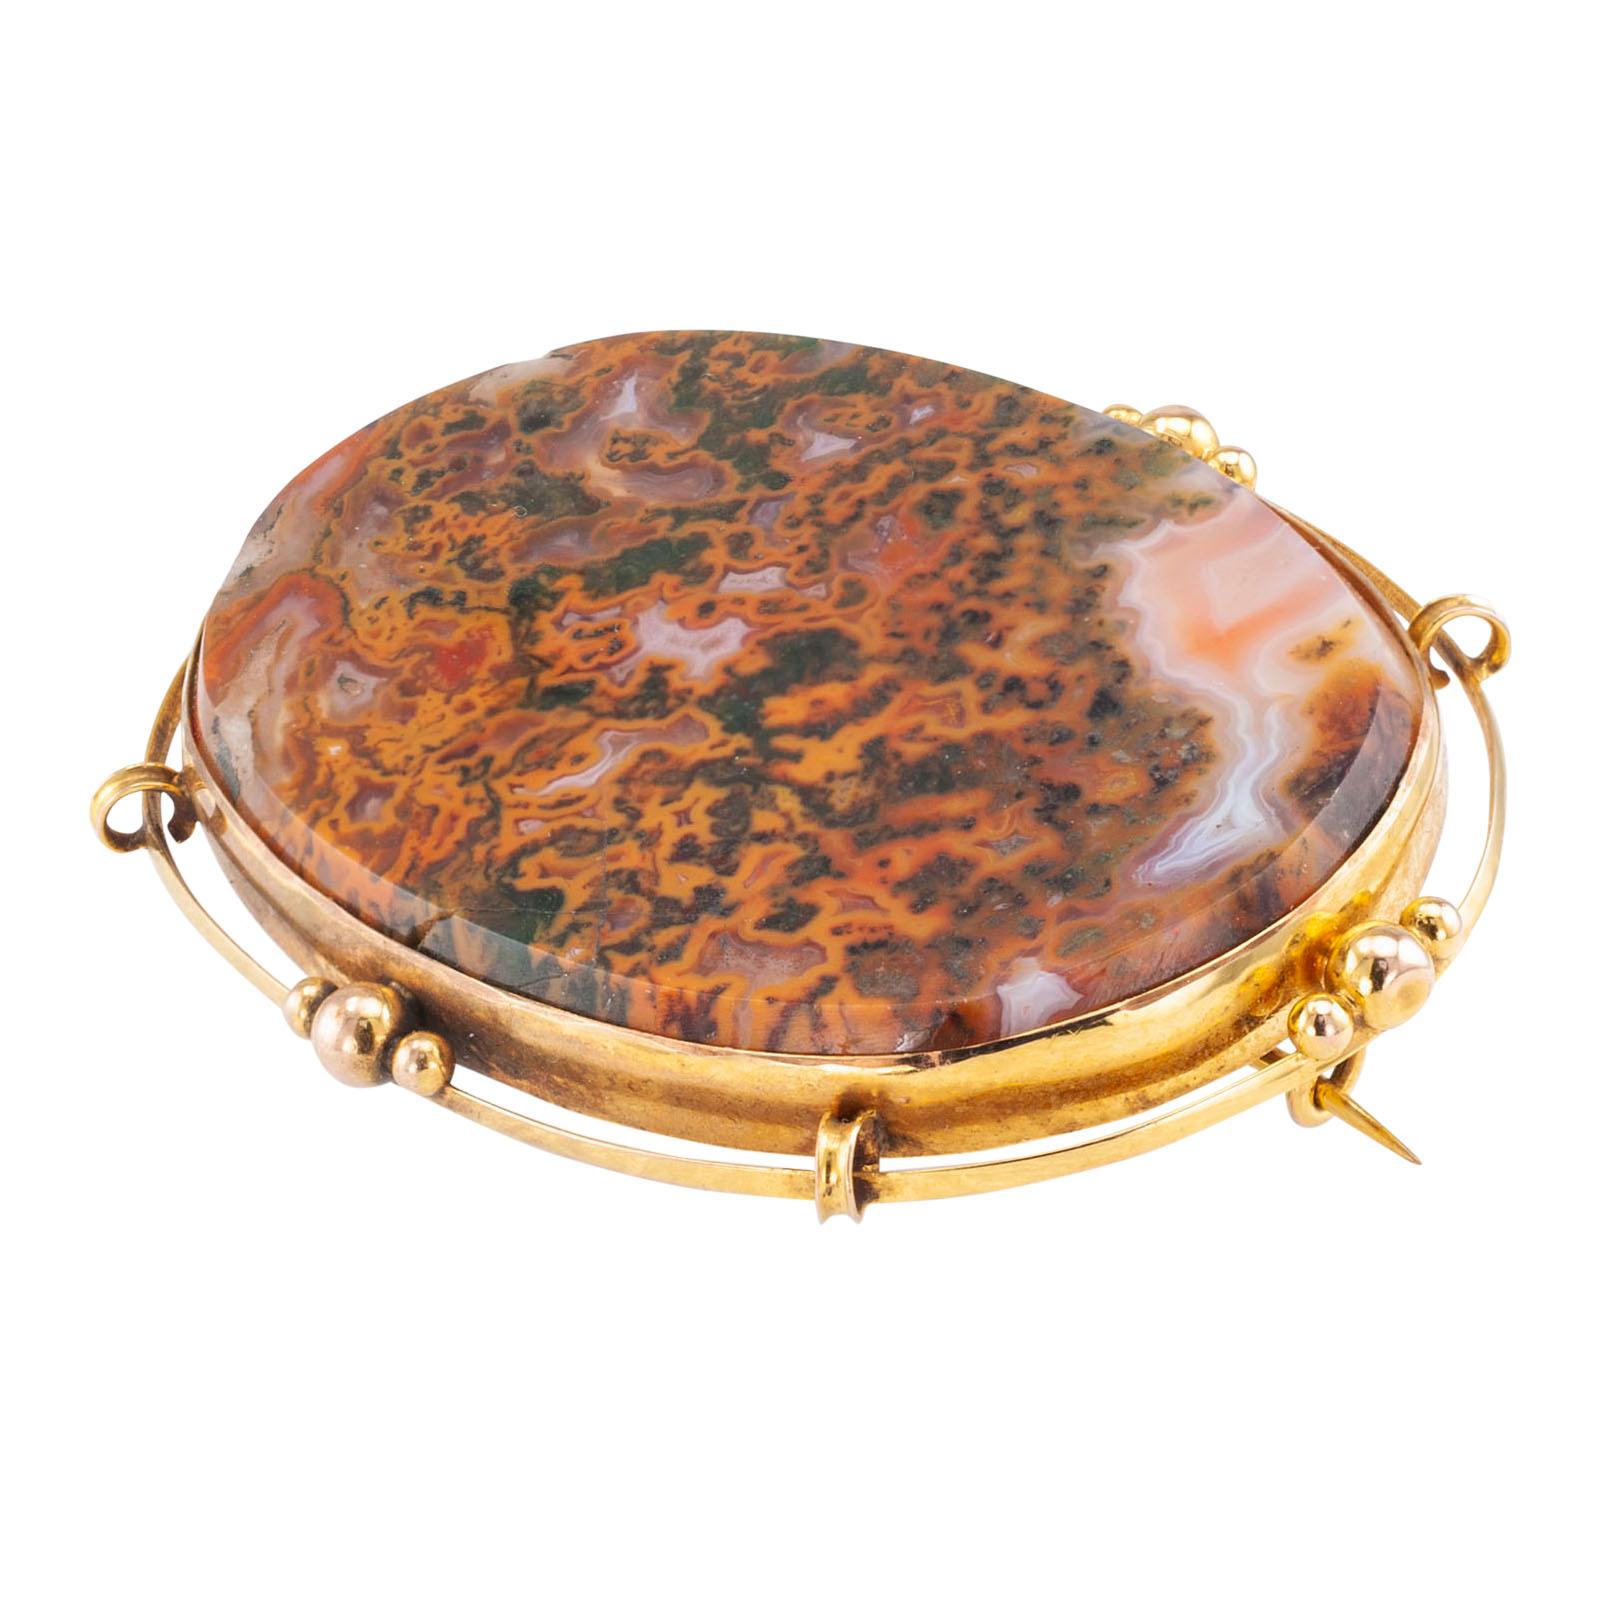 Victorian moss agate and yellow gold brooch circa 1900.

DETAILS:
GEMSTONES: one large oval flat-top moss agate stone.

METAL: 9-karat yellow gold.

MEASUREMENTS: approximately 2-5/16” (5.9 cm) horizontal width and 1-3/4” (4.4 cm) vertical